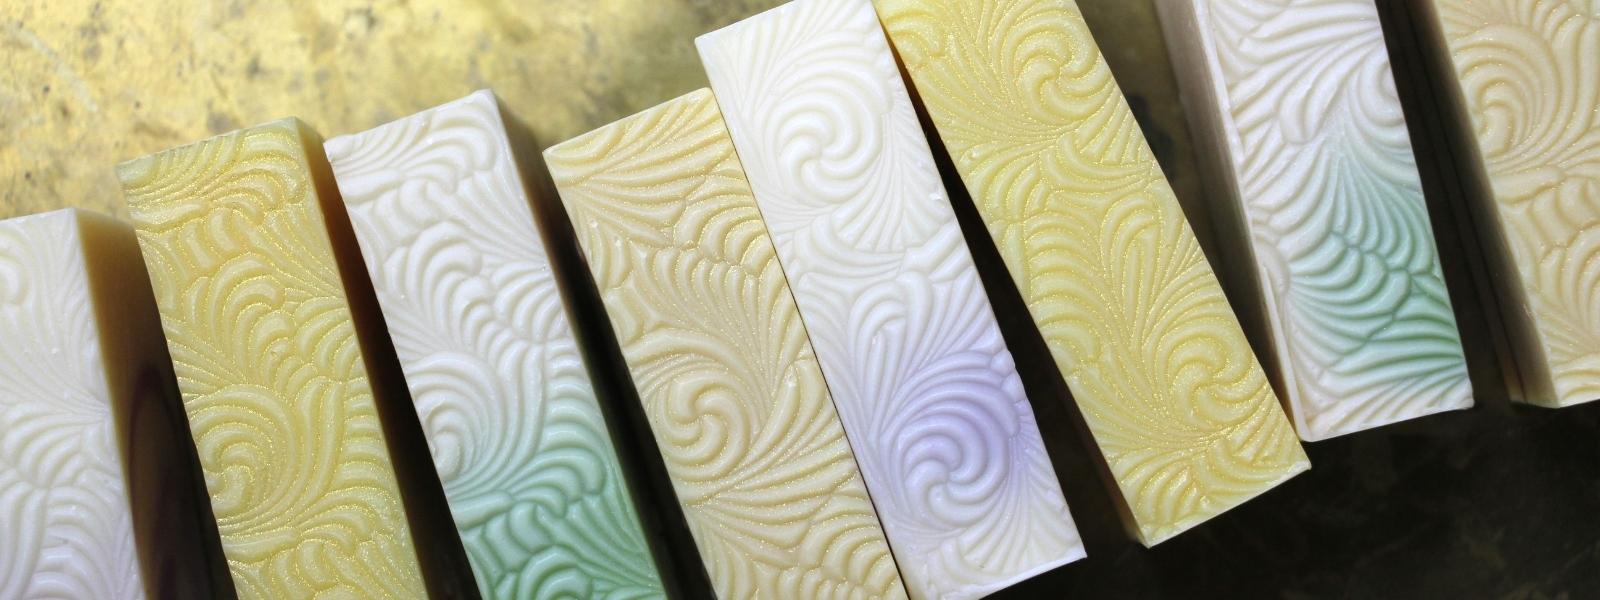 Handmade Soap Gilded Olive Apothecary